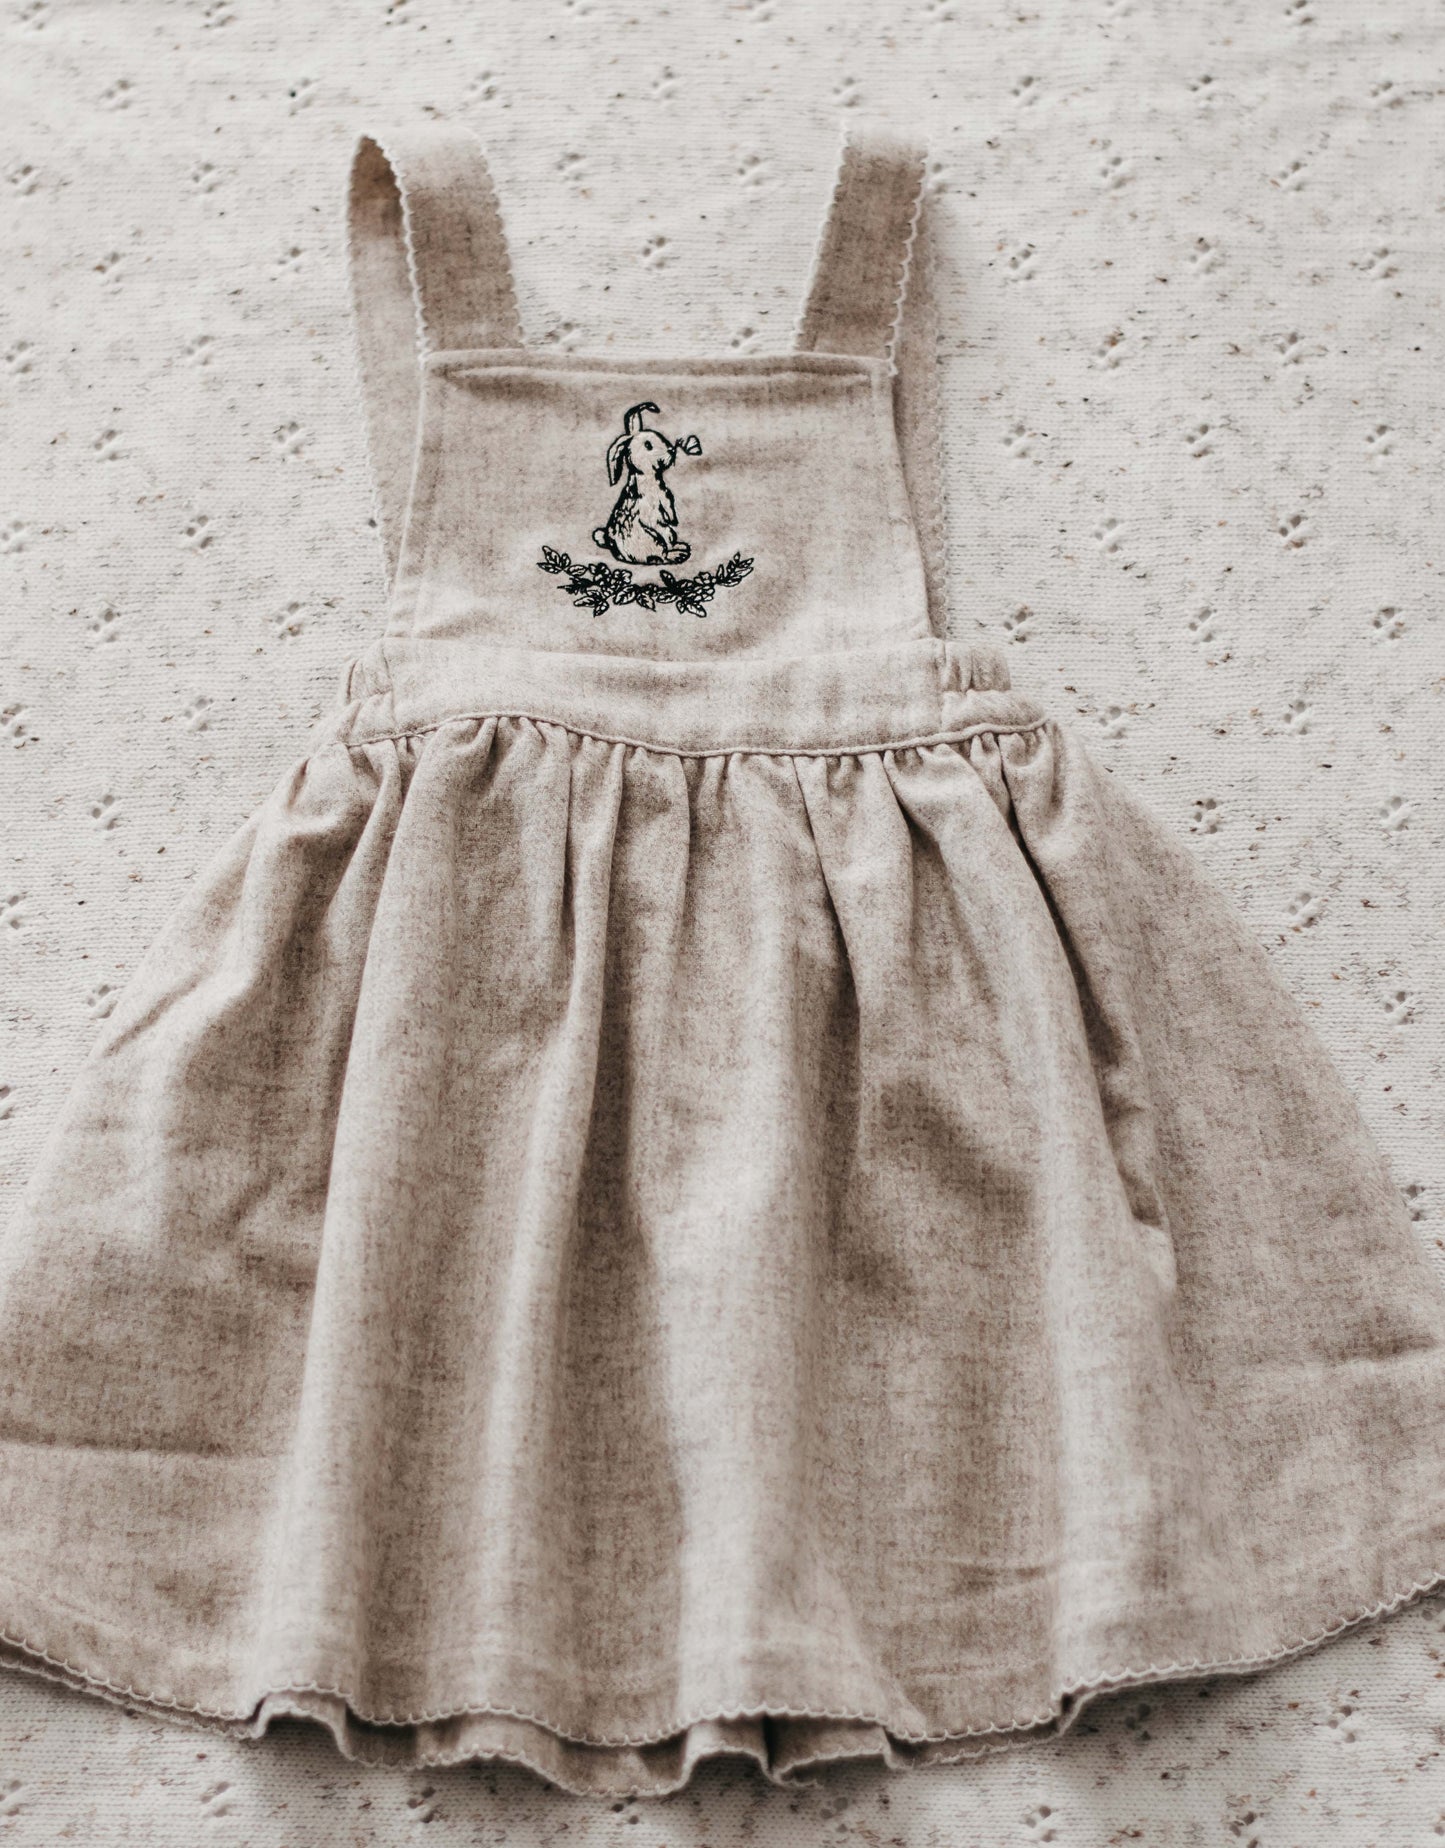 A Bencer and Hazelnut Dress made from Linen in a Oatmeal Colour with a hand drawn little Bunny Print